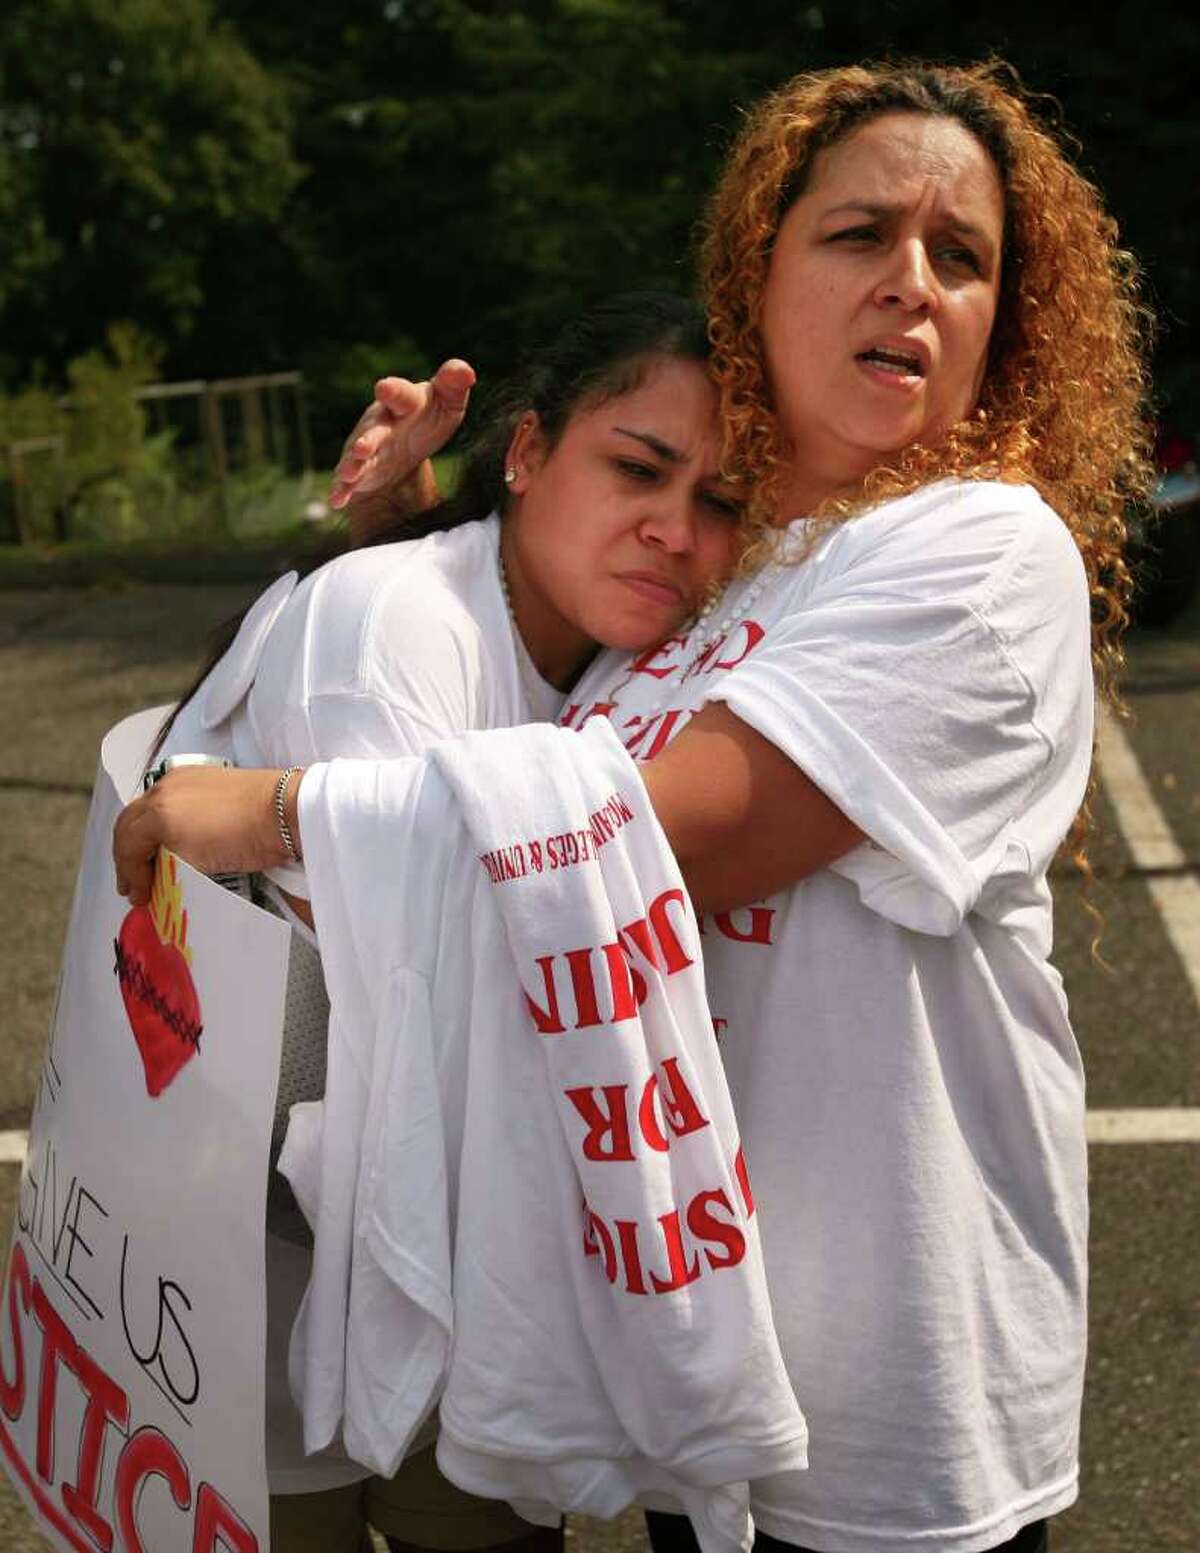 2010 Sacred Heart University graduate Jasmine Vega, left, is comforted by her mother Jacqueline Rossy-Vega, both of Bronx, NY, at a rally for Jasmine's cause outside Sacred Heart University in Fairfield on Tuesday, September 7, 2010. Vega was injured in a sorority hazing incident on October 2, 2009.